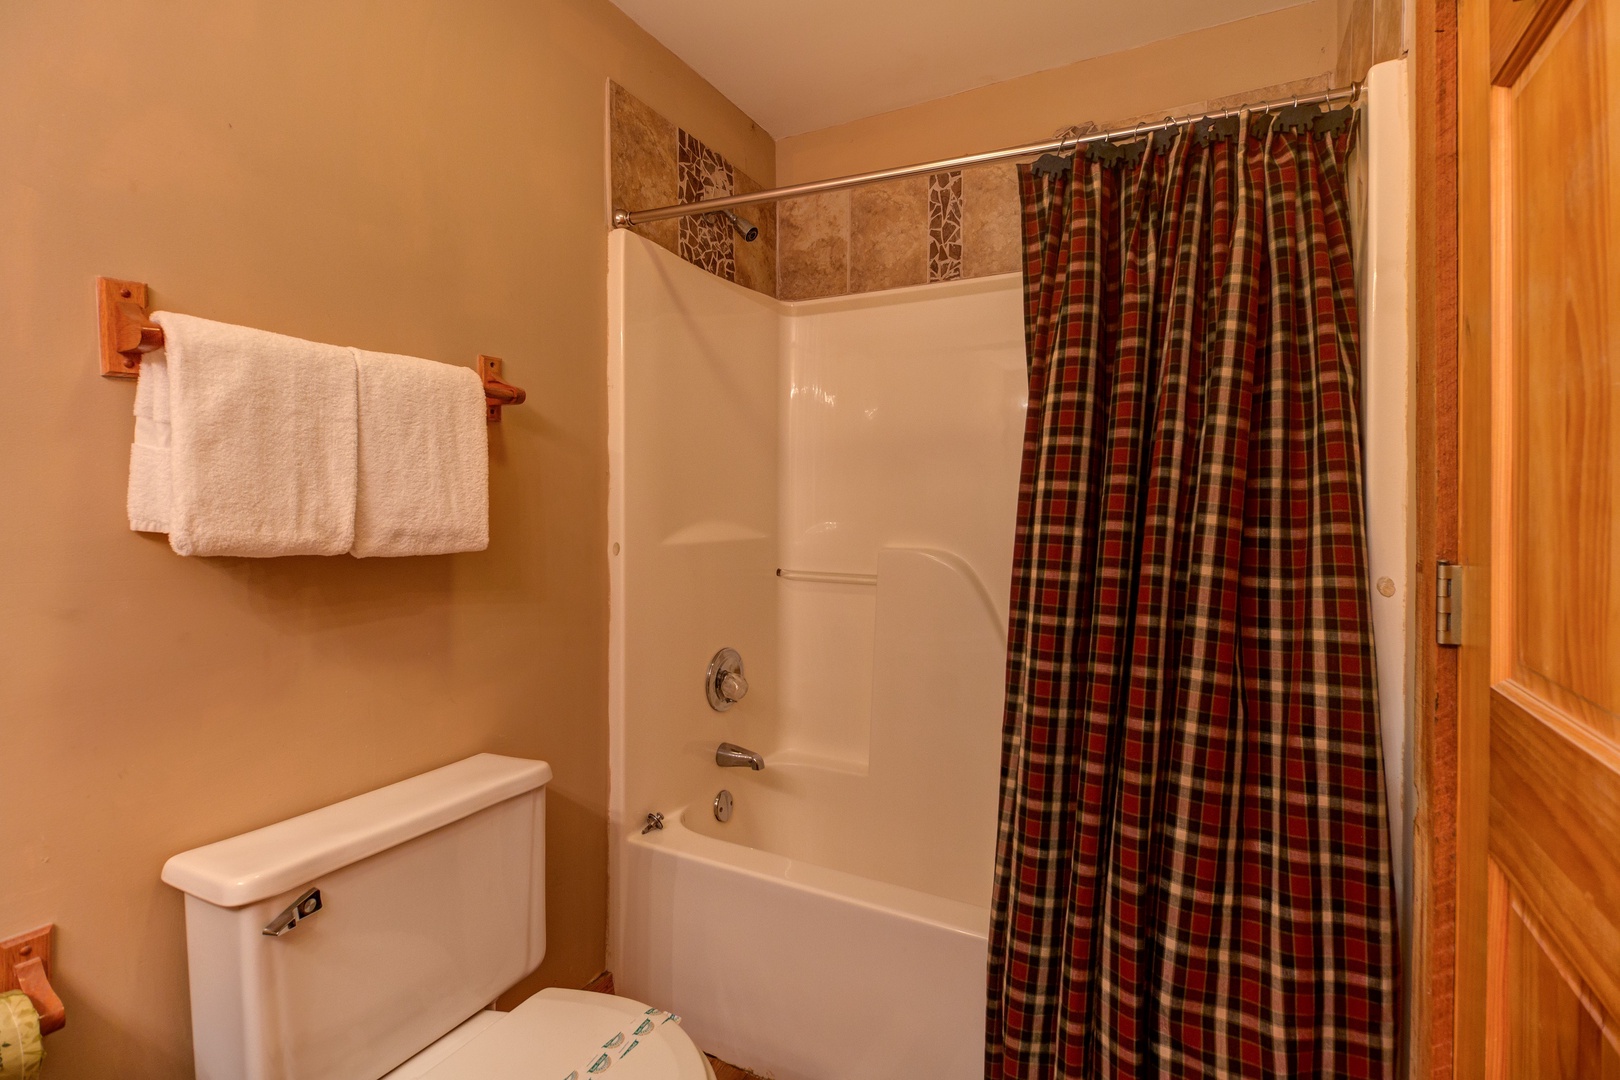 Bathroom with a tub and shower at Just for Fun, a 4 bedroom cabin rental located in Pigeon Forge